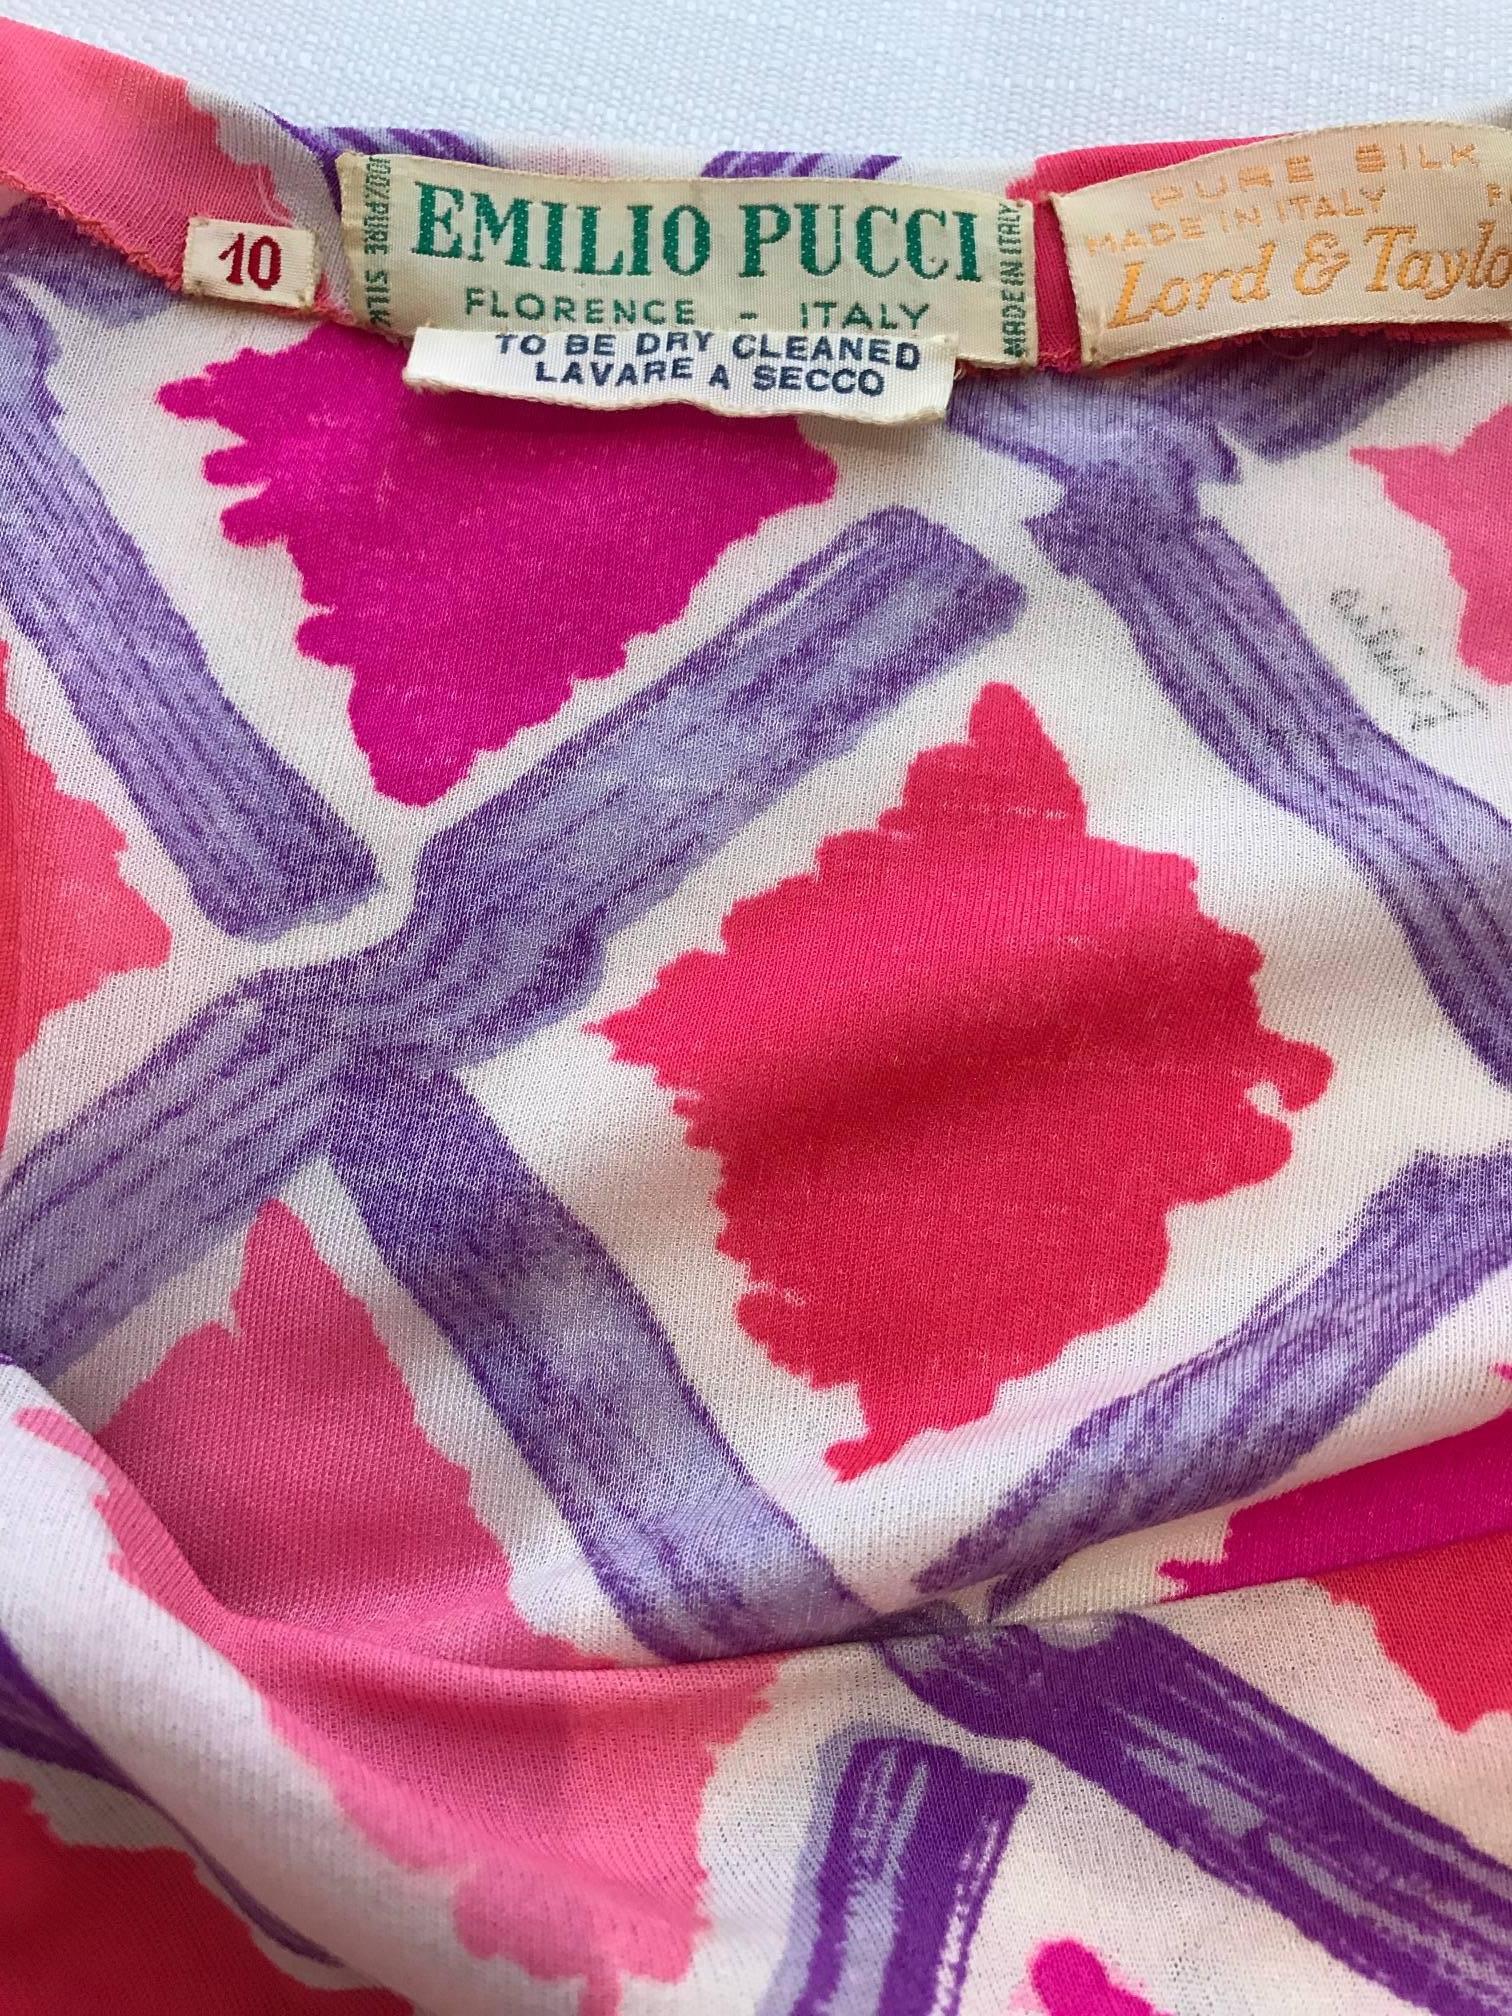 1960s Emilio Pucci Pink and Purple Geometric Print Jersey vintage day dress In Good Condition For Sale In Beverly Hills, CA